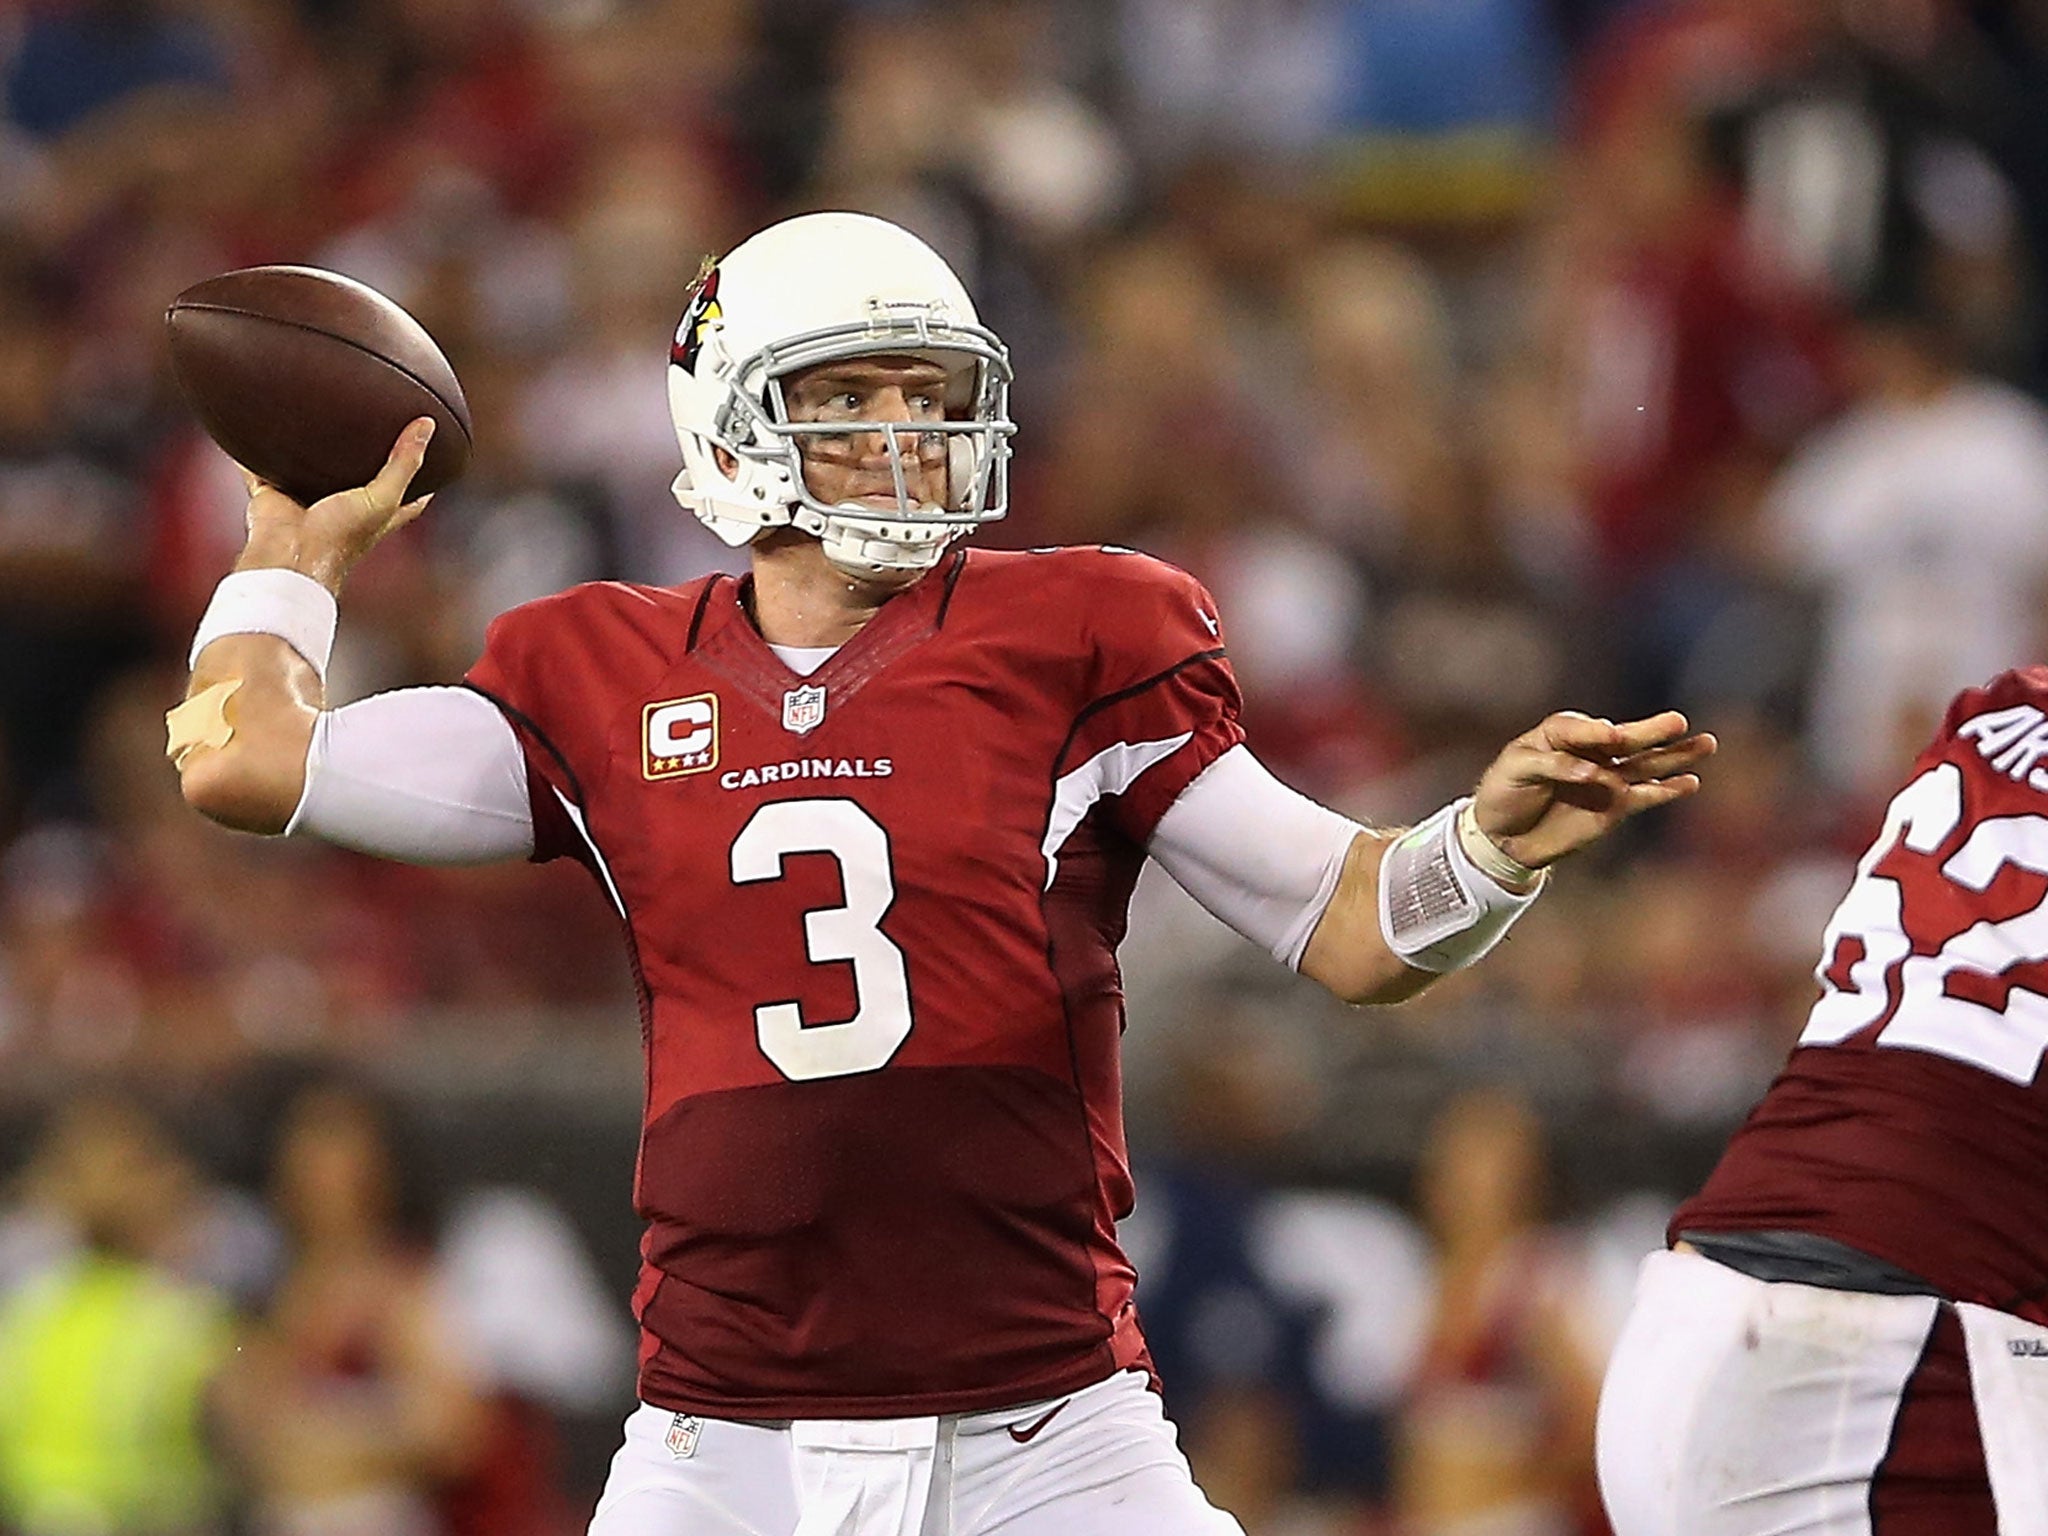 Arizona Cardinals quarter-back Carson Palmer launches a pass late-on during the 18-17 win over the San Diego Chargers